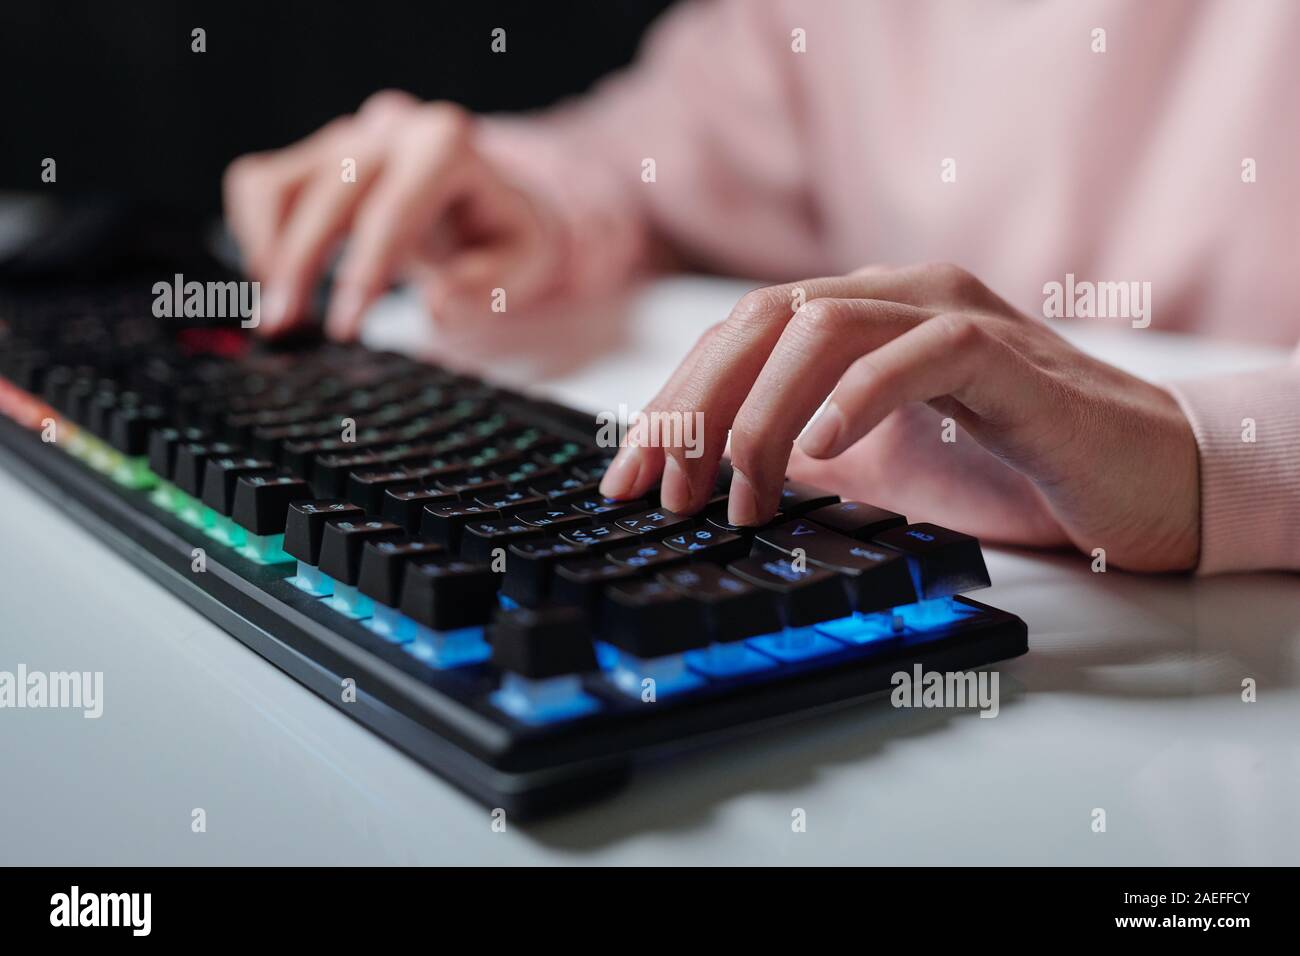 Hands of teenager over keys of computer keyboard typing while sitting by desk Stock Photo